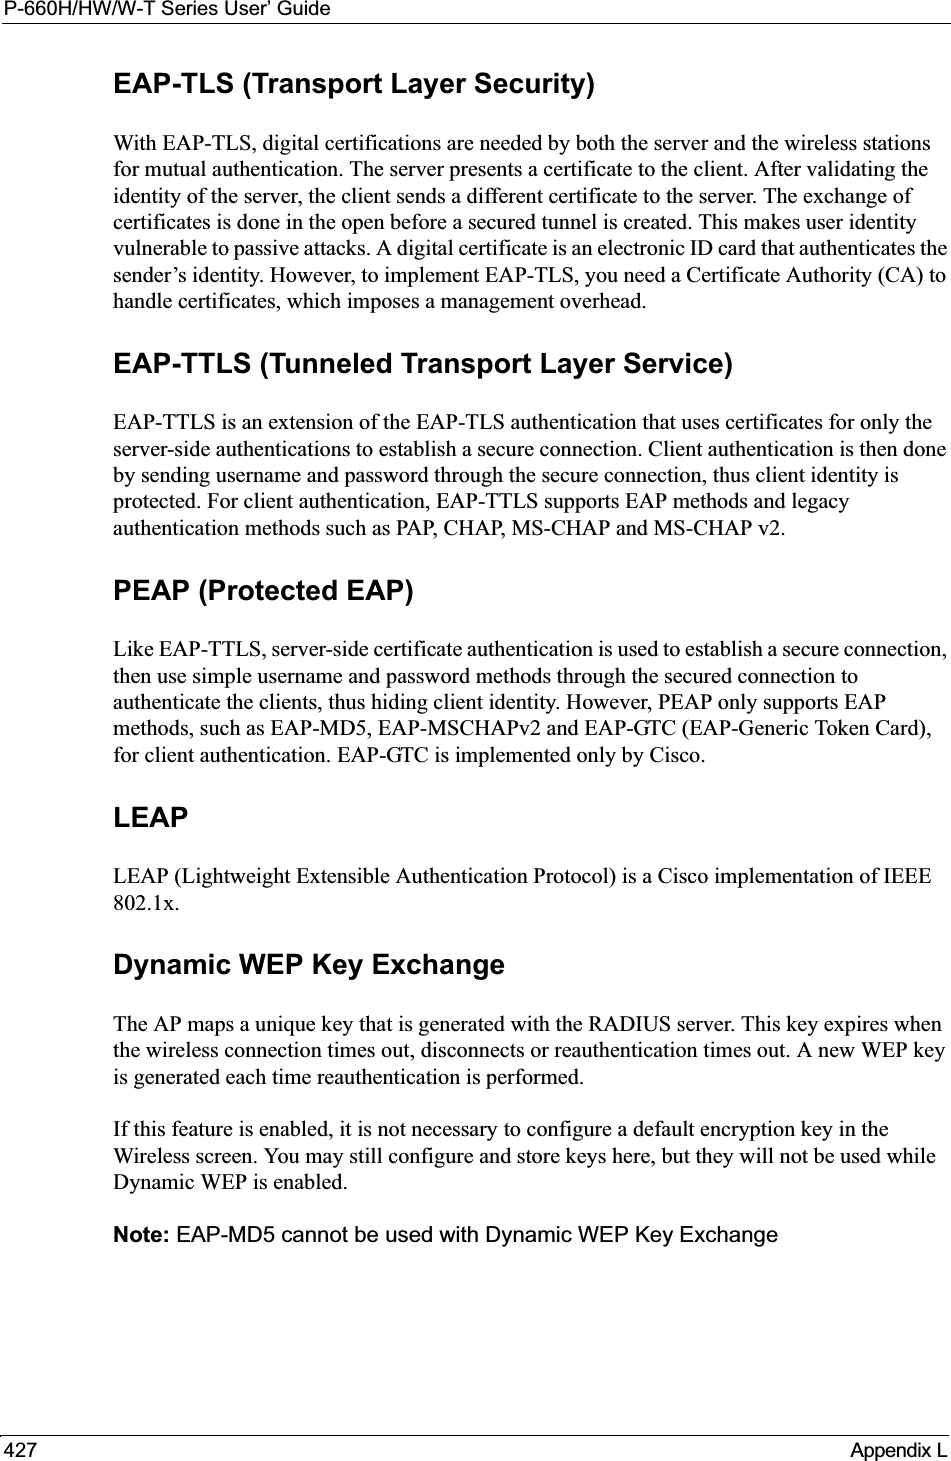 P-660H/HW/W-T Series User’ Guide427 Appendix LEAP-TLS (Transport Layer Security)With EAP-TLS, digital certifications are needed by both the server and the wireless stations for mutual authentication. The server presents a certificate to the client. After validating the identity of the server, the client sends a different certificate to the server. The exchange of certificates is done in the open before a secured tunnel is created. This makes user identity vulnerable to passive attacks. A digital certificate is an electronic ID card that authenticates the sender’s identity. However, to implement EAP-TLS, you need a Certificate Authority (CA) to handle certificates, which imposes a management overhead. EAP-TTLS (Tunneled Transport Layer Service) EAP-TTLS is an extension of the EAP-TLS authentication that uses certificates for only the server-side authentications to establish a secure connection. Client authentication is then done by sending username and password through the secure connection, thus client identity is protected. For client authentication, EAP-TTLS supports EAP methods and legacy authentication methods such as PAP, CHAP, MS-CHAP and MS-CHAP v2. PEAP (Protected EAP)Like EAP-TTLS, server-side certificate authentication is used to establish a secure connection, then use simple username and password methods through the secured connection to authenticate the clients, thus hiding client identity. However, PEAP only supports EAP methods, such as EAP-MD5, EAP-MSCHAPv2 and EAP-GTC (EAP-Generic Token Card), for client authentication. EAP-GTC is implemented only by Cisco.LEAPLEAP (Lightweight Extensible Authentication Protocol) is a Cisco implementation of IEEE 802.1x. Dynamic WEP Key ExchangeThe AP maps a unique key that is generated with the RADIUS server. This key expires when the wireless connection times out, disconnects or reauthentication times out. A new WEP key is generated each time reauthentication is performed.If this feature is enabled, it is not necessary to configure a default encryption key in the Wireless screen. You may still configure and store keys here, but they will not be used while Dynamic WEP is enabled.Note: EAP-MD5 cannot be used with Dynamic WEP Key Exchange